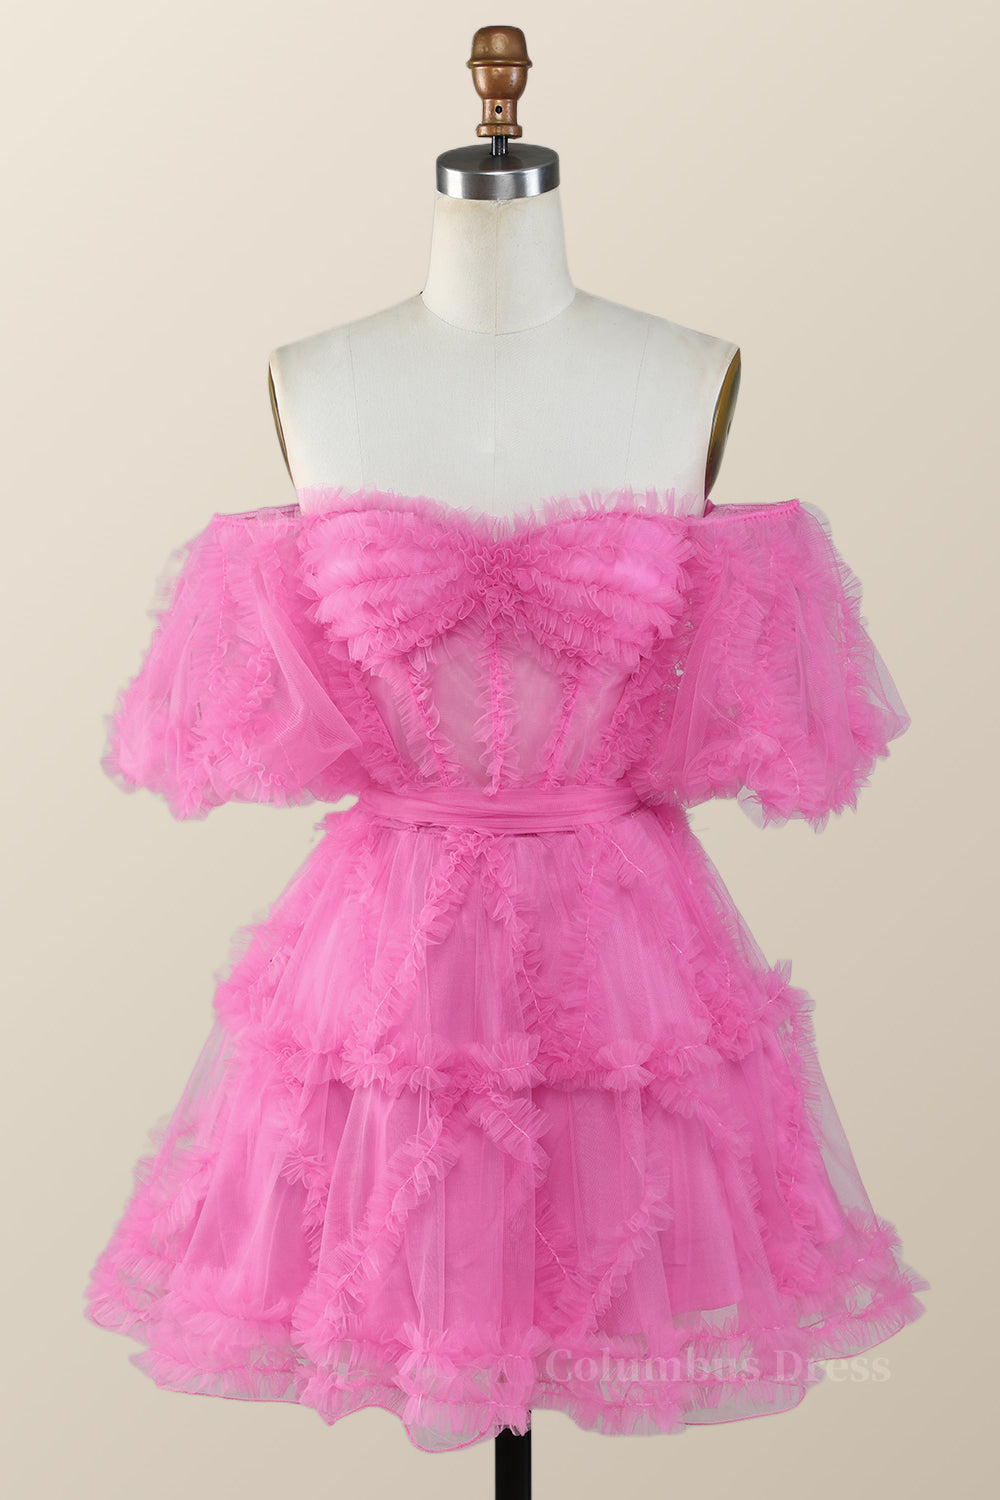 Party Dress In Store, Off the Shoulder Hot Pink Ruffles Short A-line Homecoming Dress